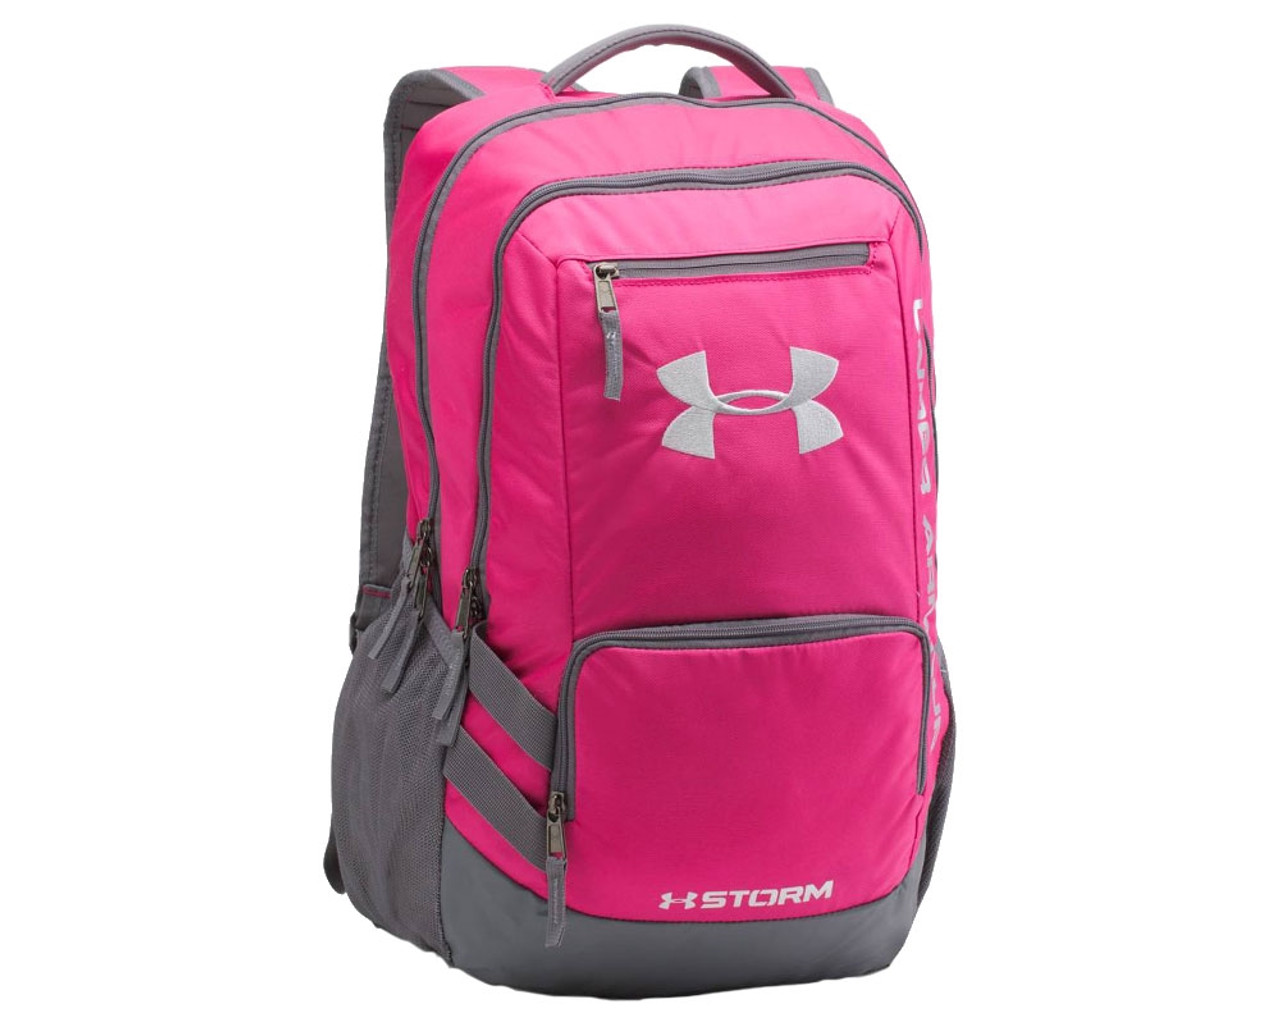 Hustle 3.0 Backpack Tropic Pink/Graphite/Silver